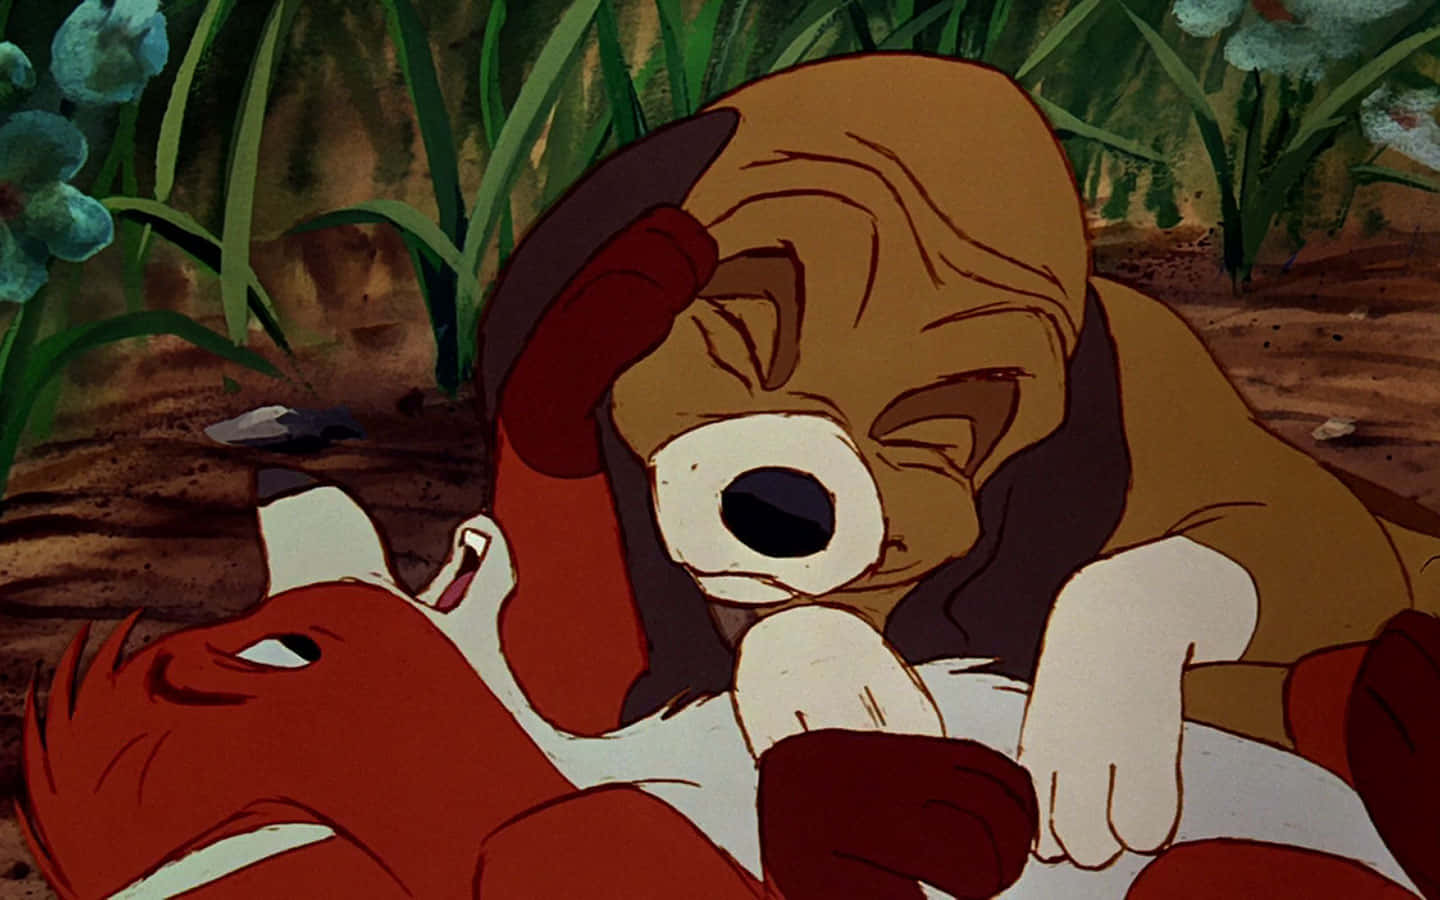 A Heartwarming Friendship - The Fox And The Hound